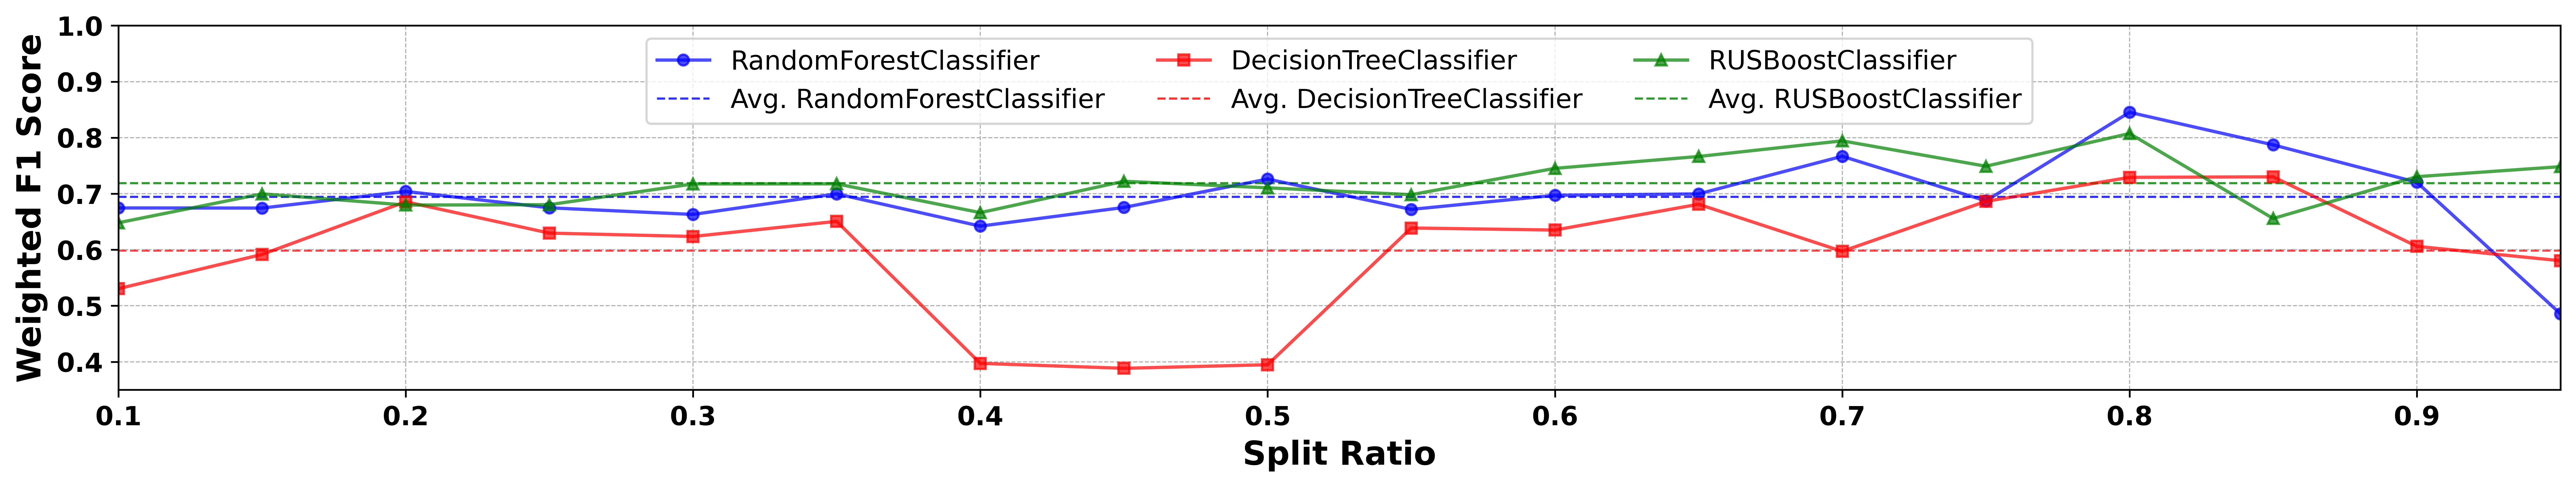 The line chart displays the performance of three machine learning models (RandomForestClassifier, DecisionTreeClassifier, and RUSBoostClassifier) with different train-test split ratios. The y-axis represents the weighted F1 score, and the x-axis represents the split ratio. RandomForestClassifier is shown in blue, DecisionTreeClassifier in red, and RUSBoostClassifier in green, with solid lines representing individual scores and dashed lines representing the average scores.